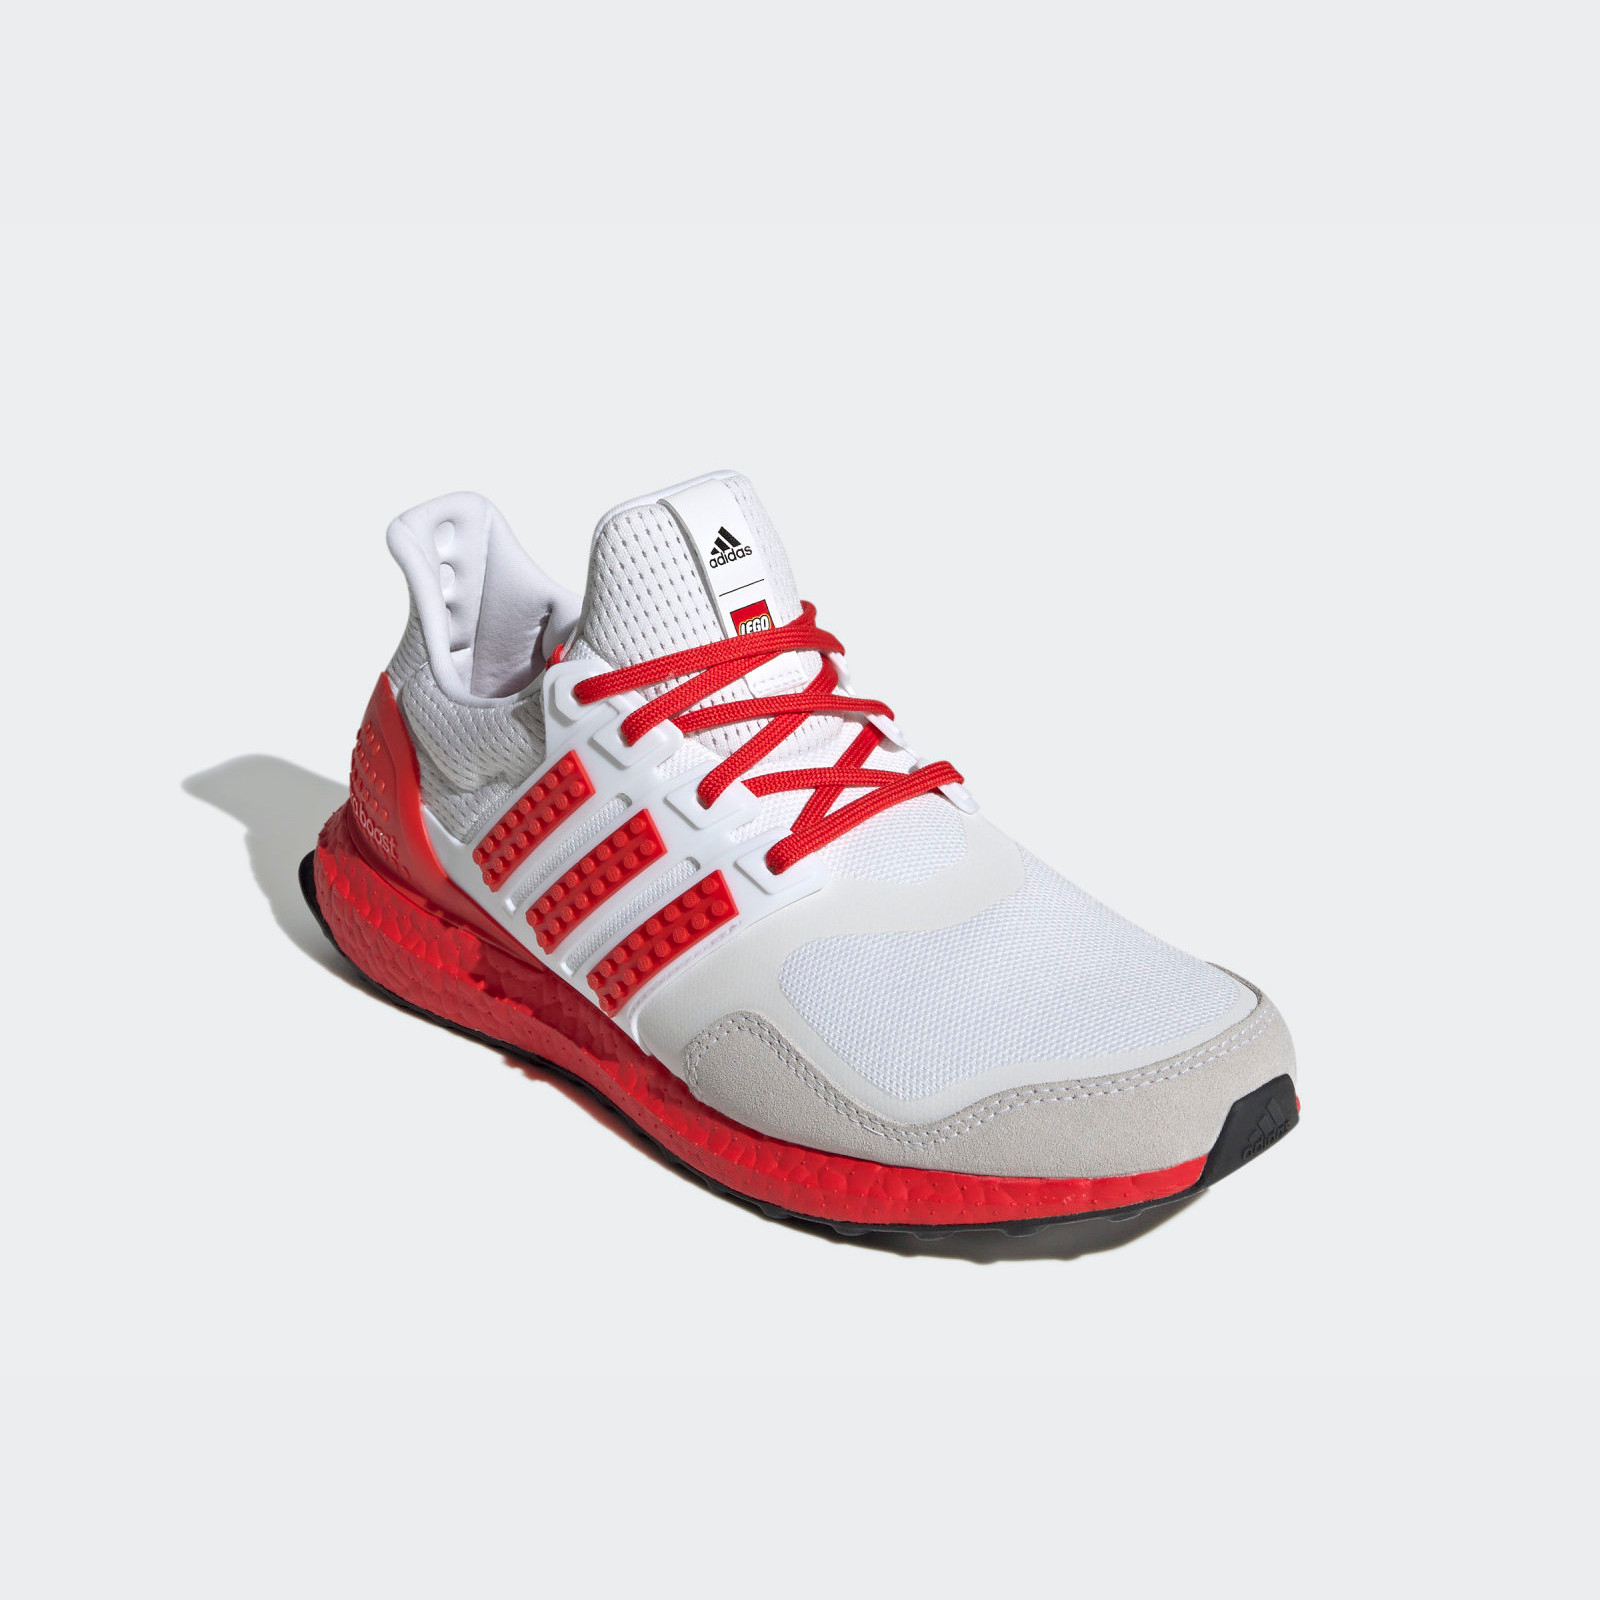 LEGO x Adidas
Ultra Boost DNA
White / Red